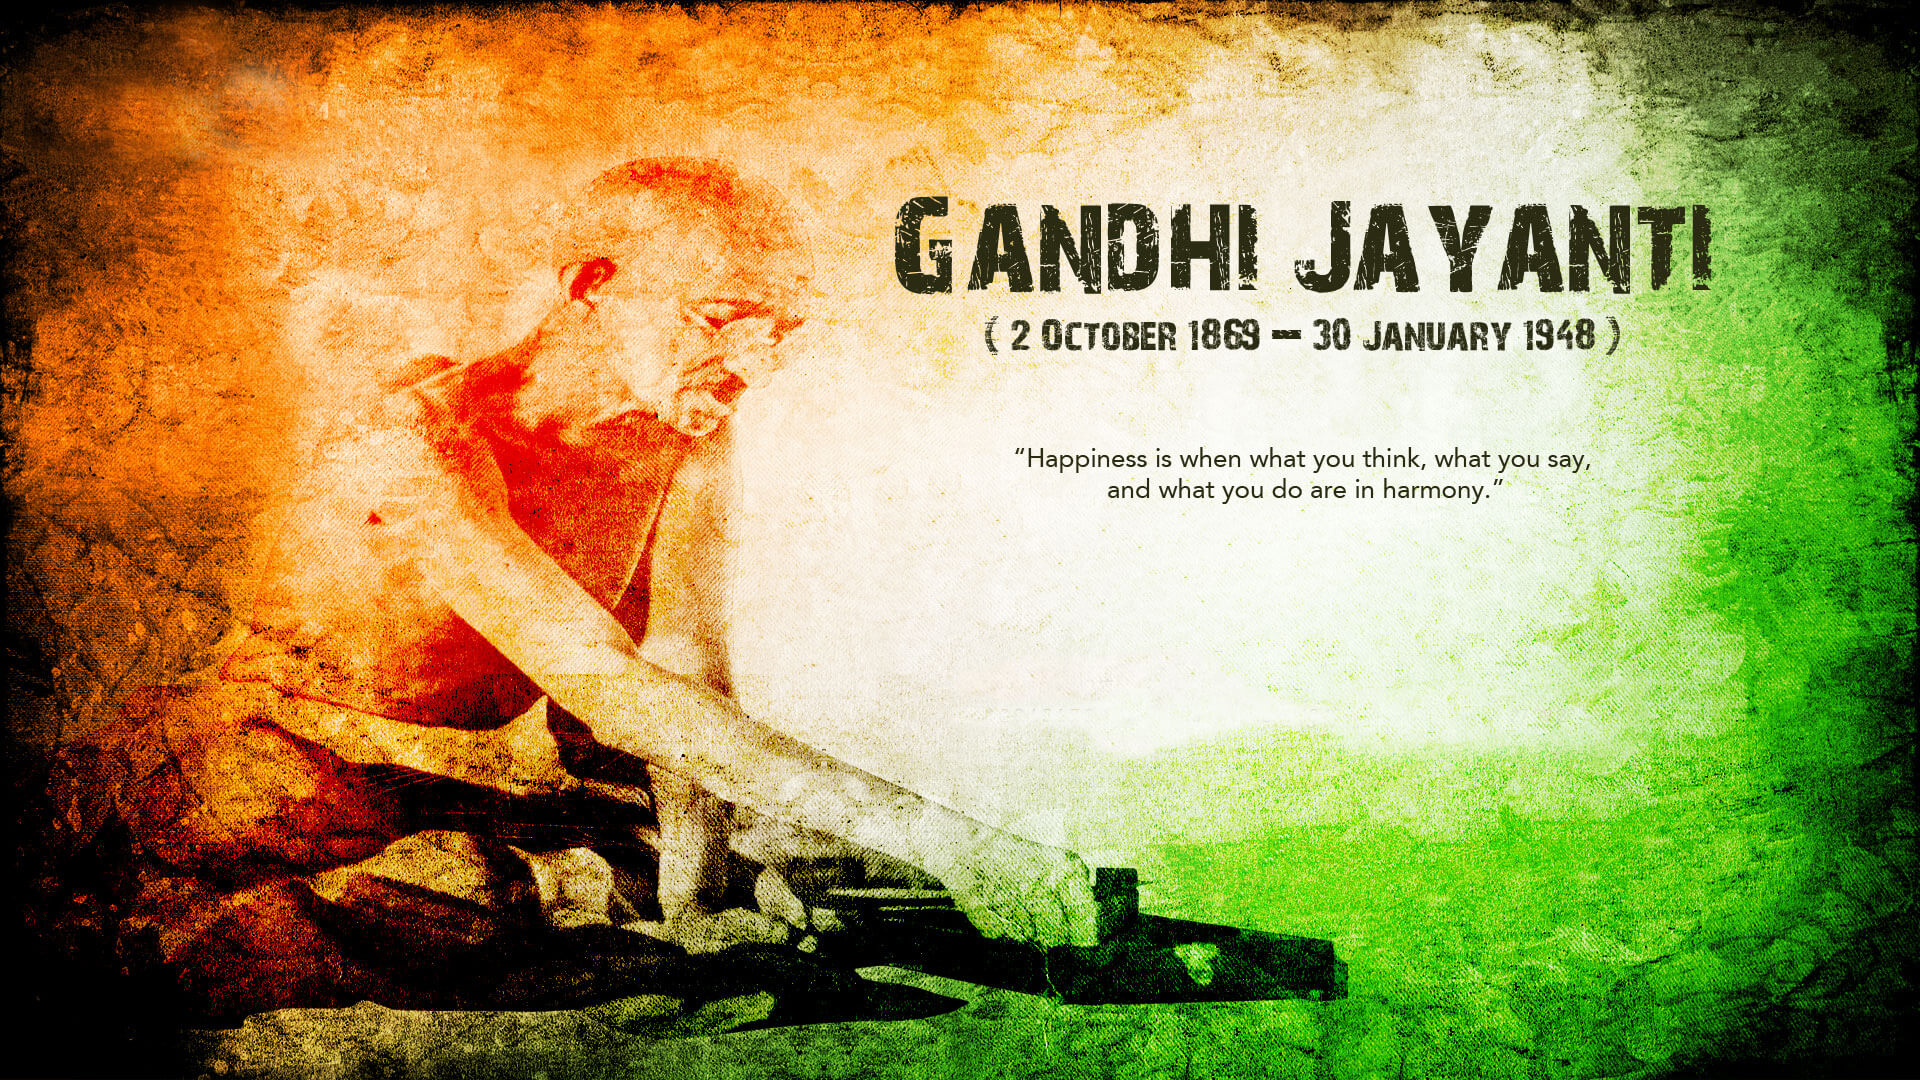 Gandhi Jayanti 2018 Wishes, Quotes, Motivational Messages, Status and Wallpaper